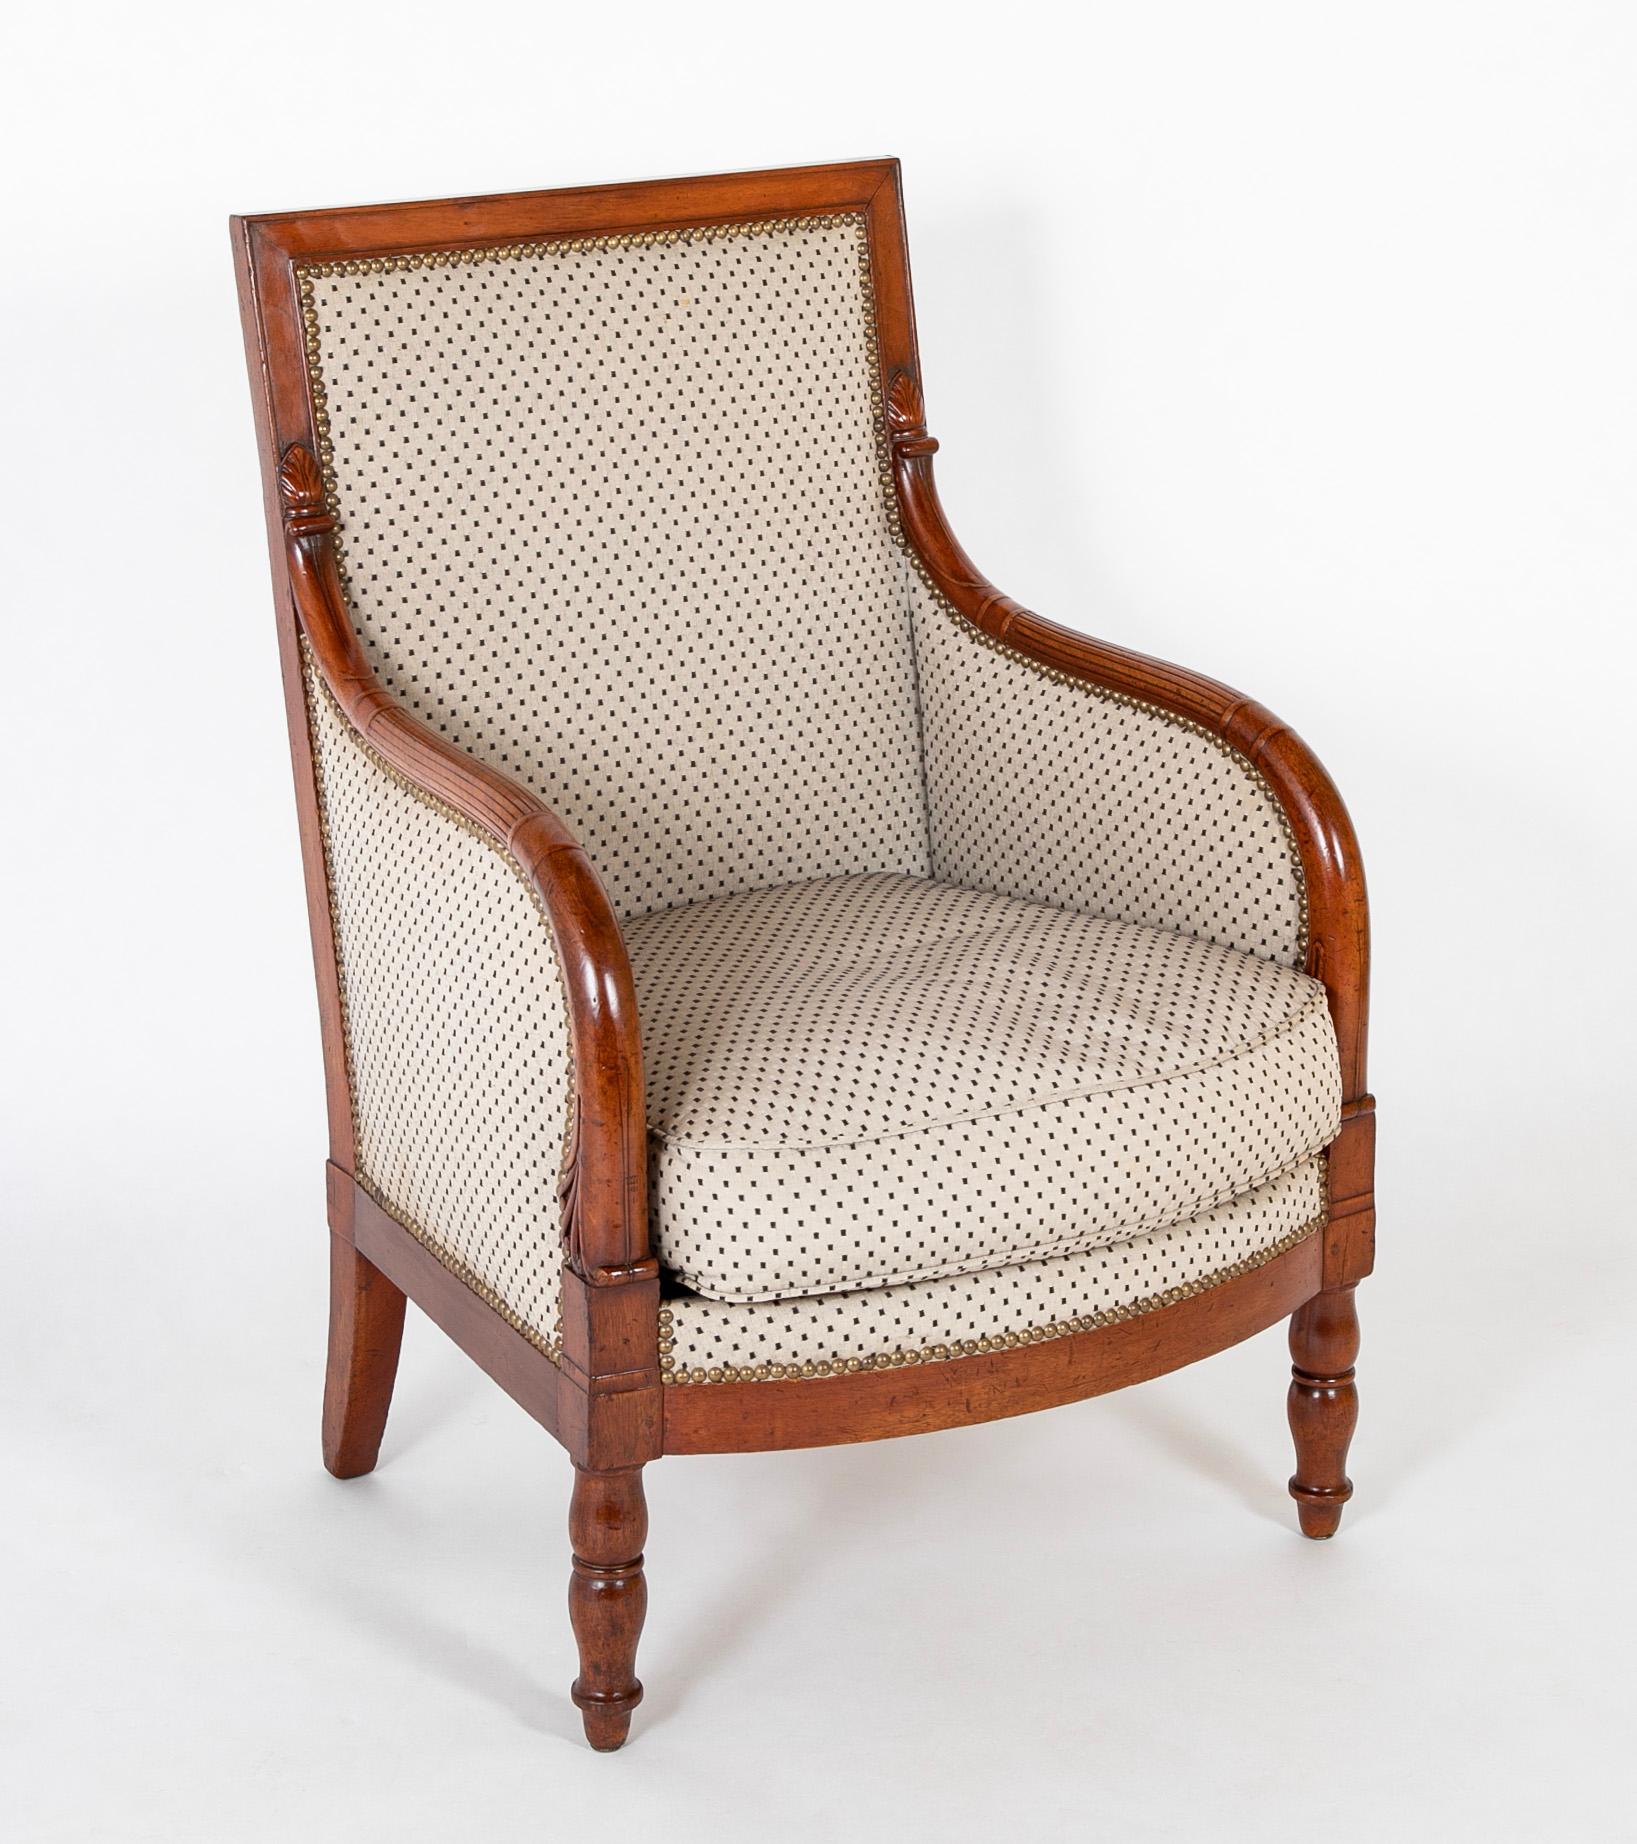 This pair of capacious, perfectly designed and executed chairs was created by the workshop of George Jacob and his son, Francois, during the Empire period at their Parisian workshop on the rue Meslee.  The Jacobs were a prime furniture dynasty